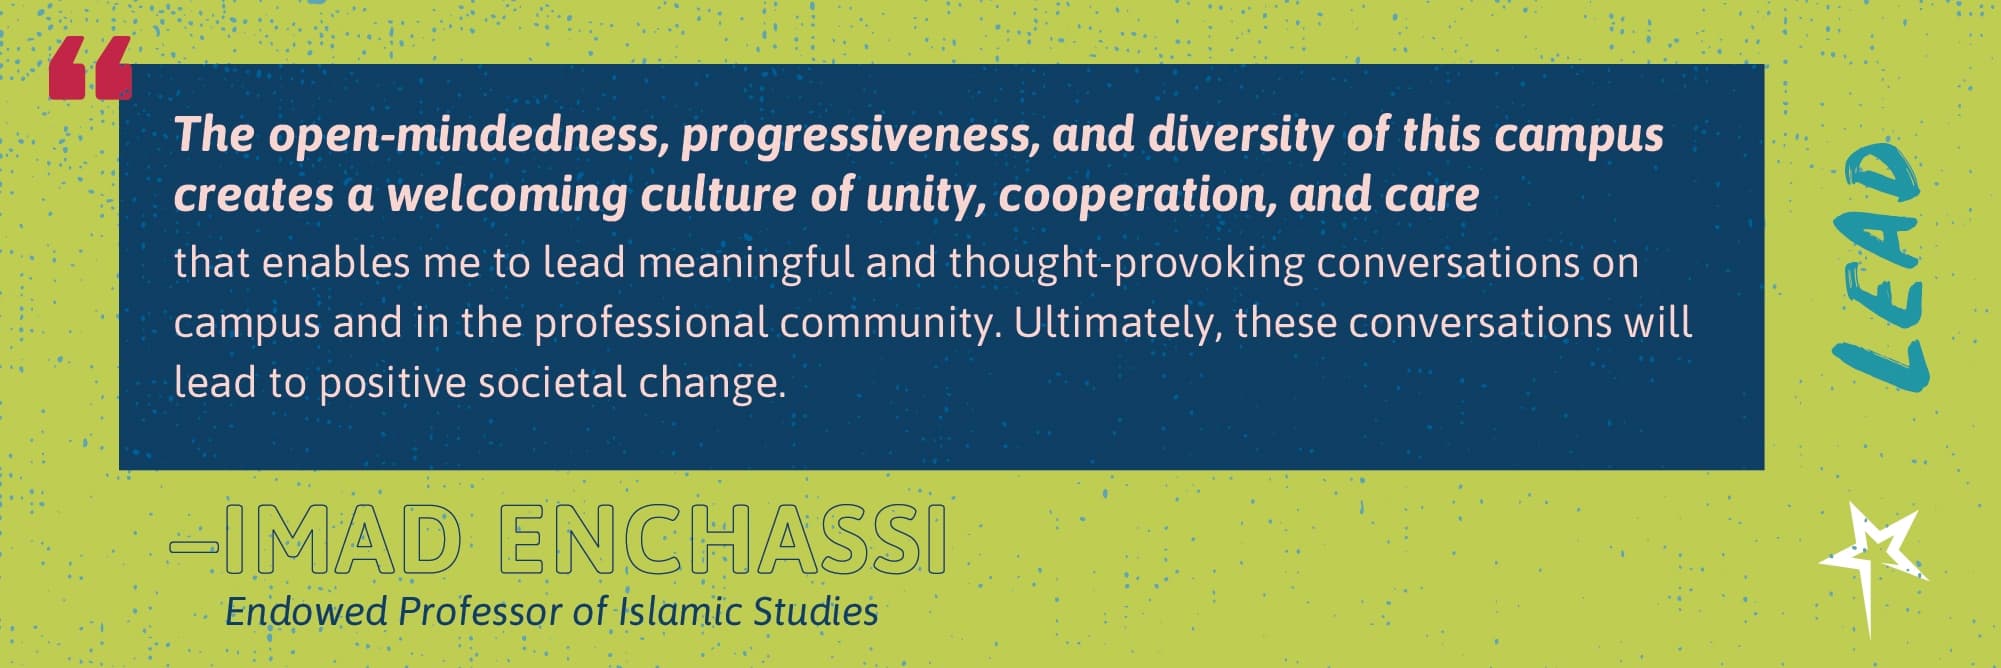 Lead: “The open-mindedness, progressiveness, and diversity of this campus creates a welcoming culture of unity, cooperation, and care that enables me to lead meaningful and thought-provoking conversations on campus and in the professional community. Ultimately, these conversations will lead to positive societal change.” —Imad Enchassi, Endowed Professor of Islamic Studies